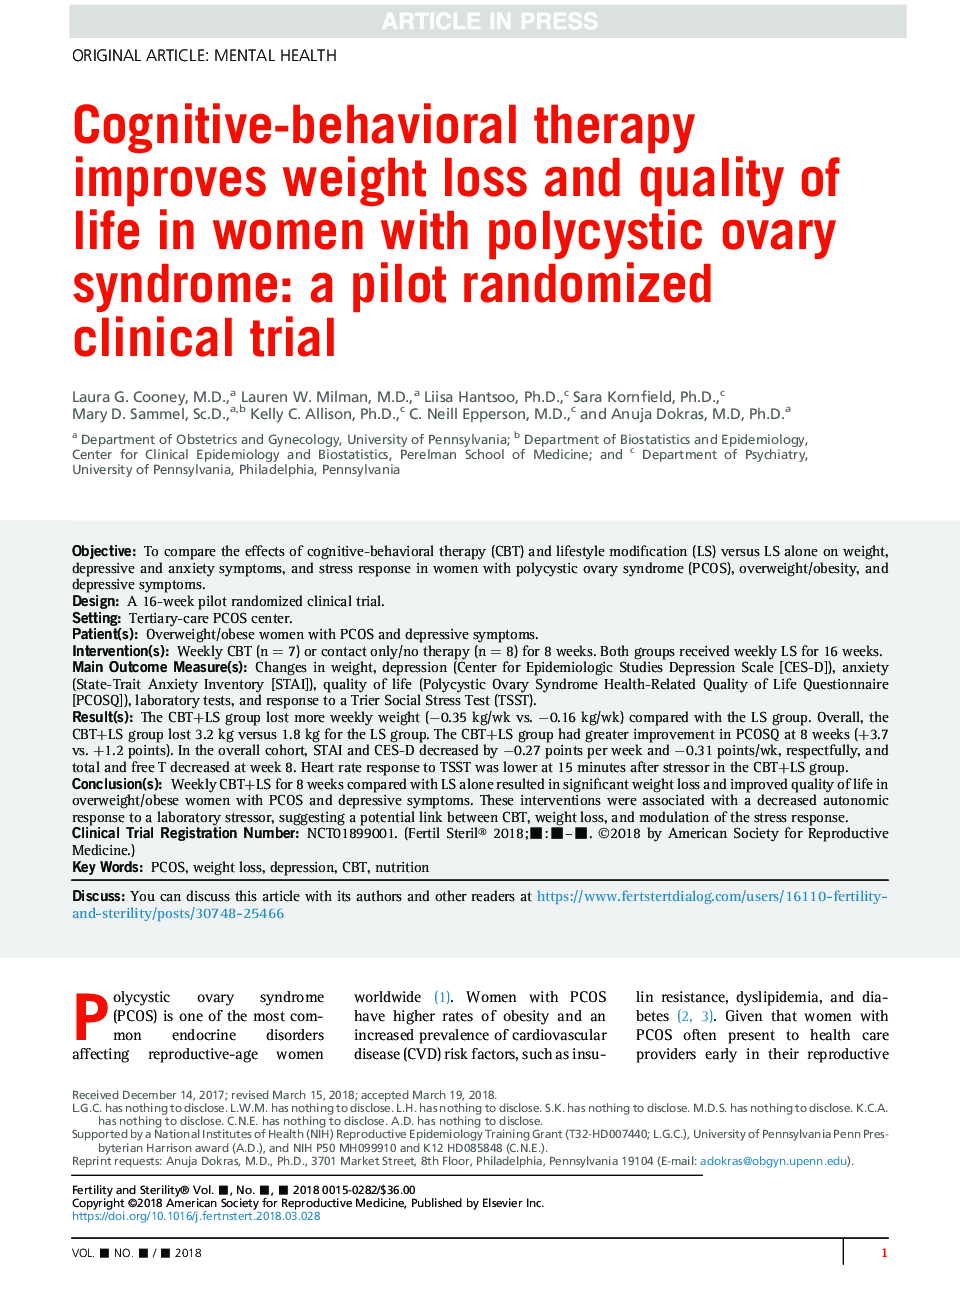 Cognitive-behavioral therapy improves weight loss and quality of life in women with polycystic ovary syndrome: a pilot randomized clinical trial